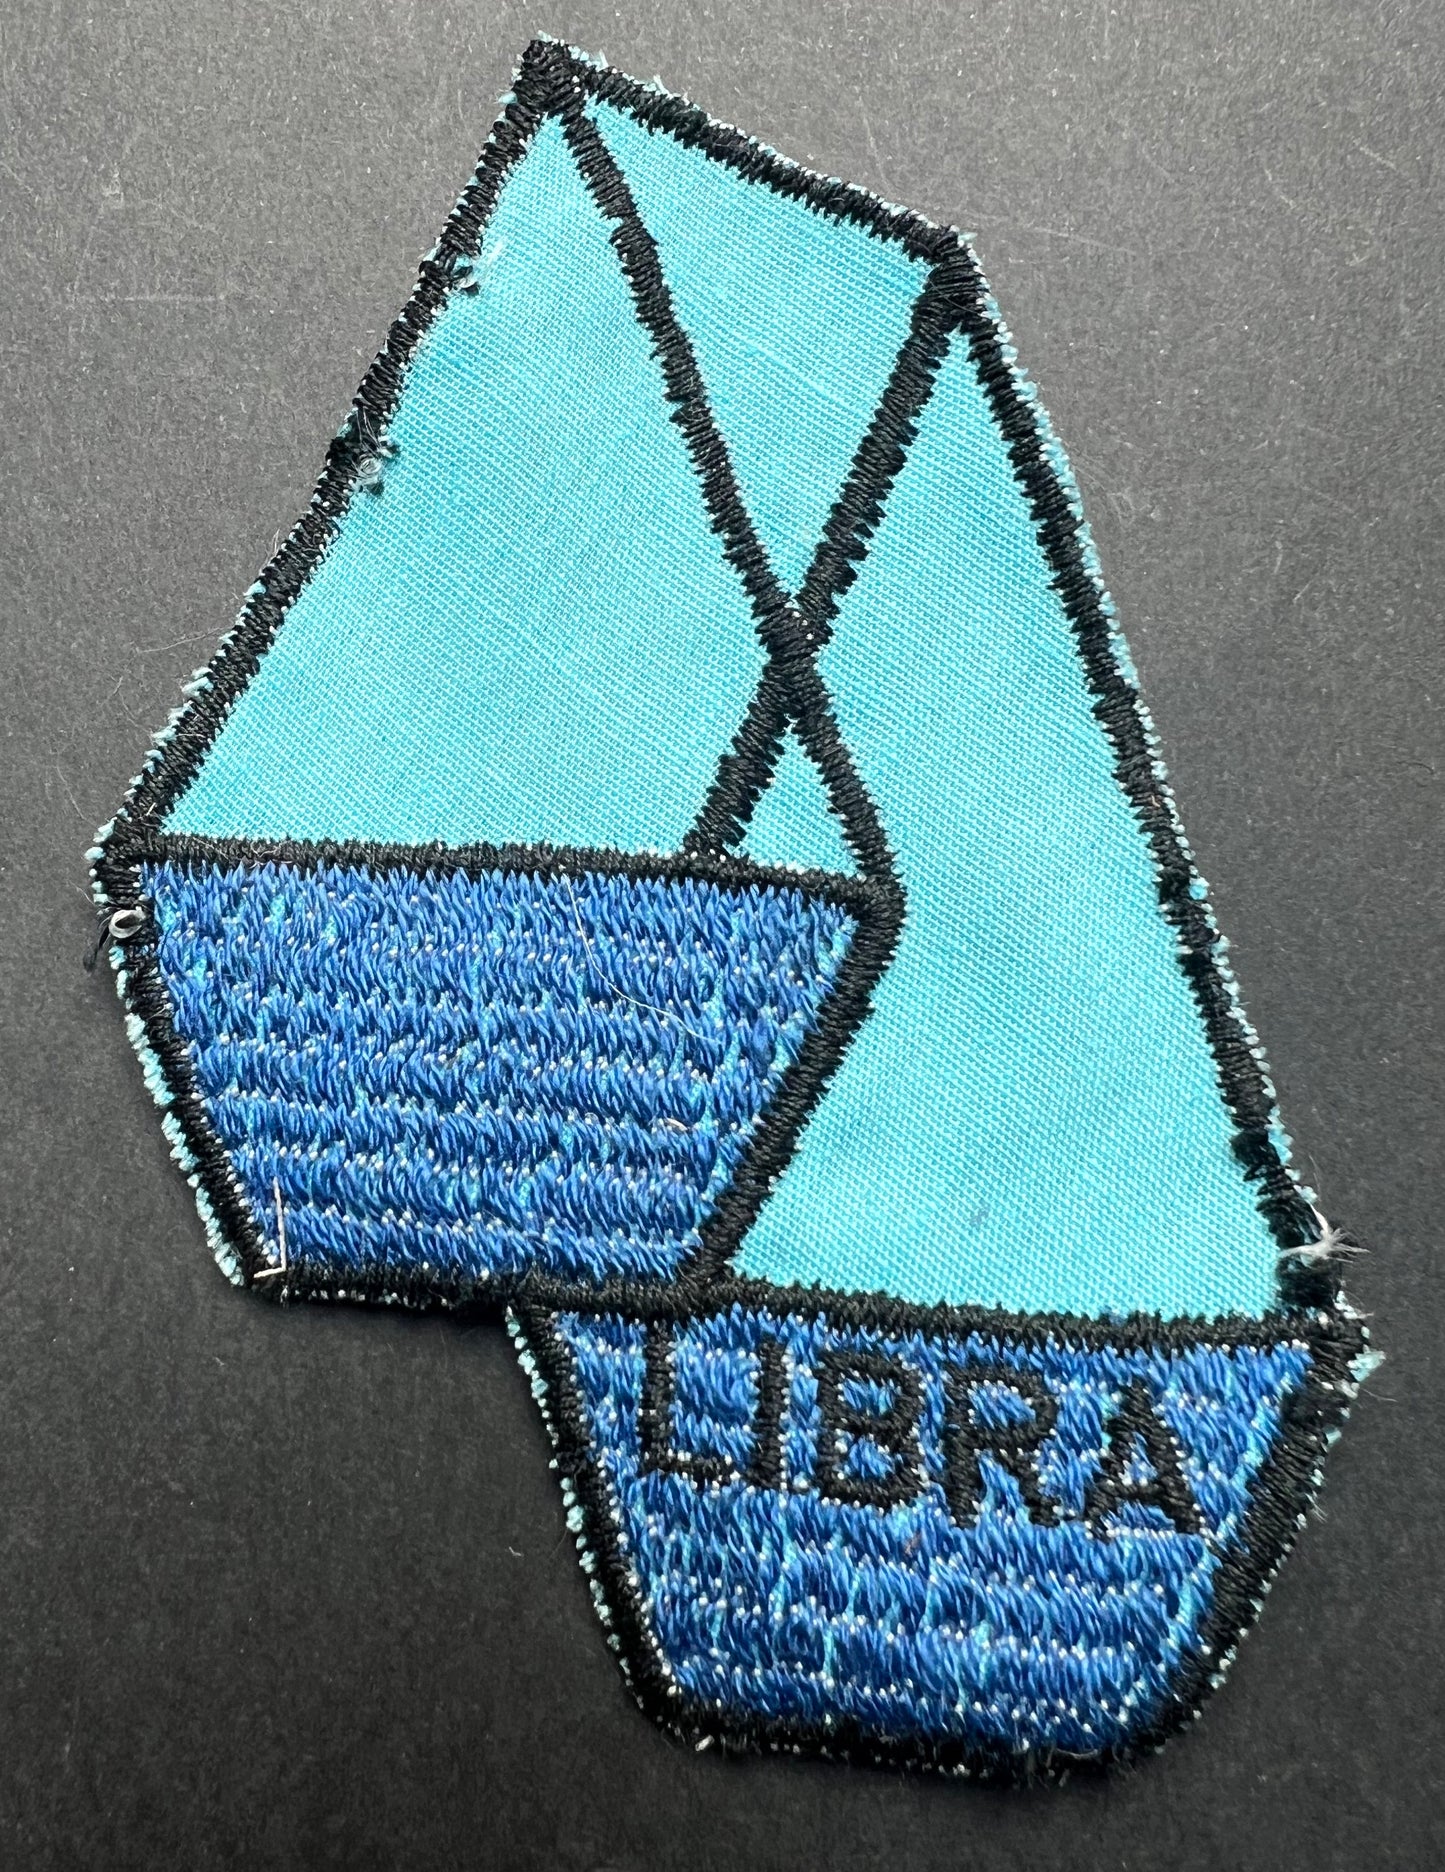 1970s Sew On Libra Patch